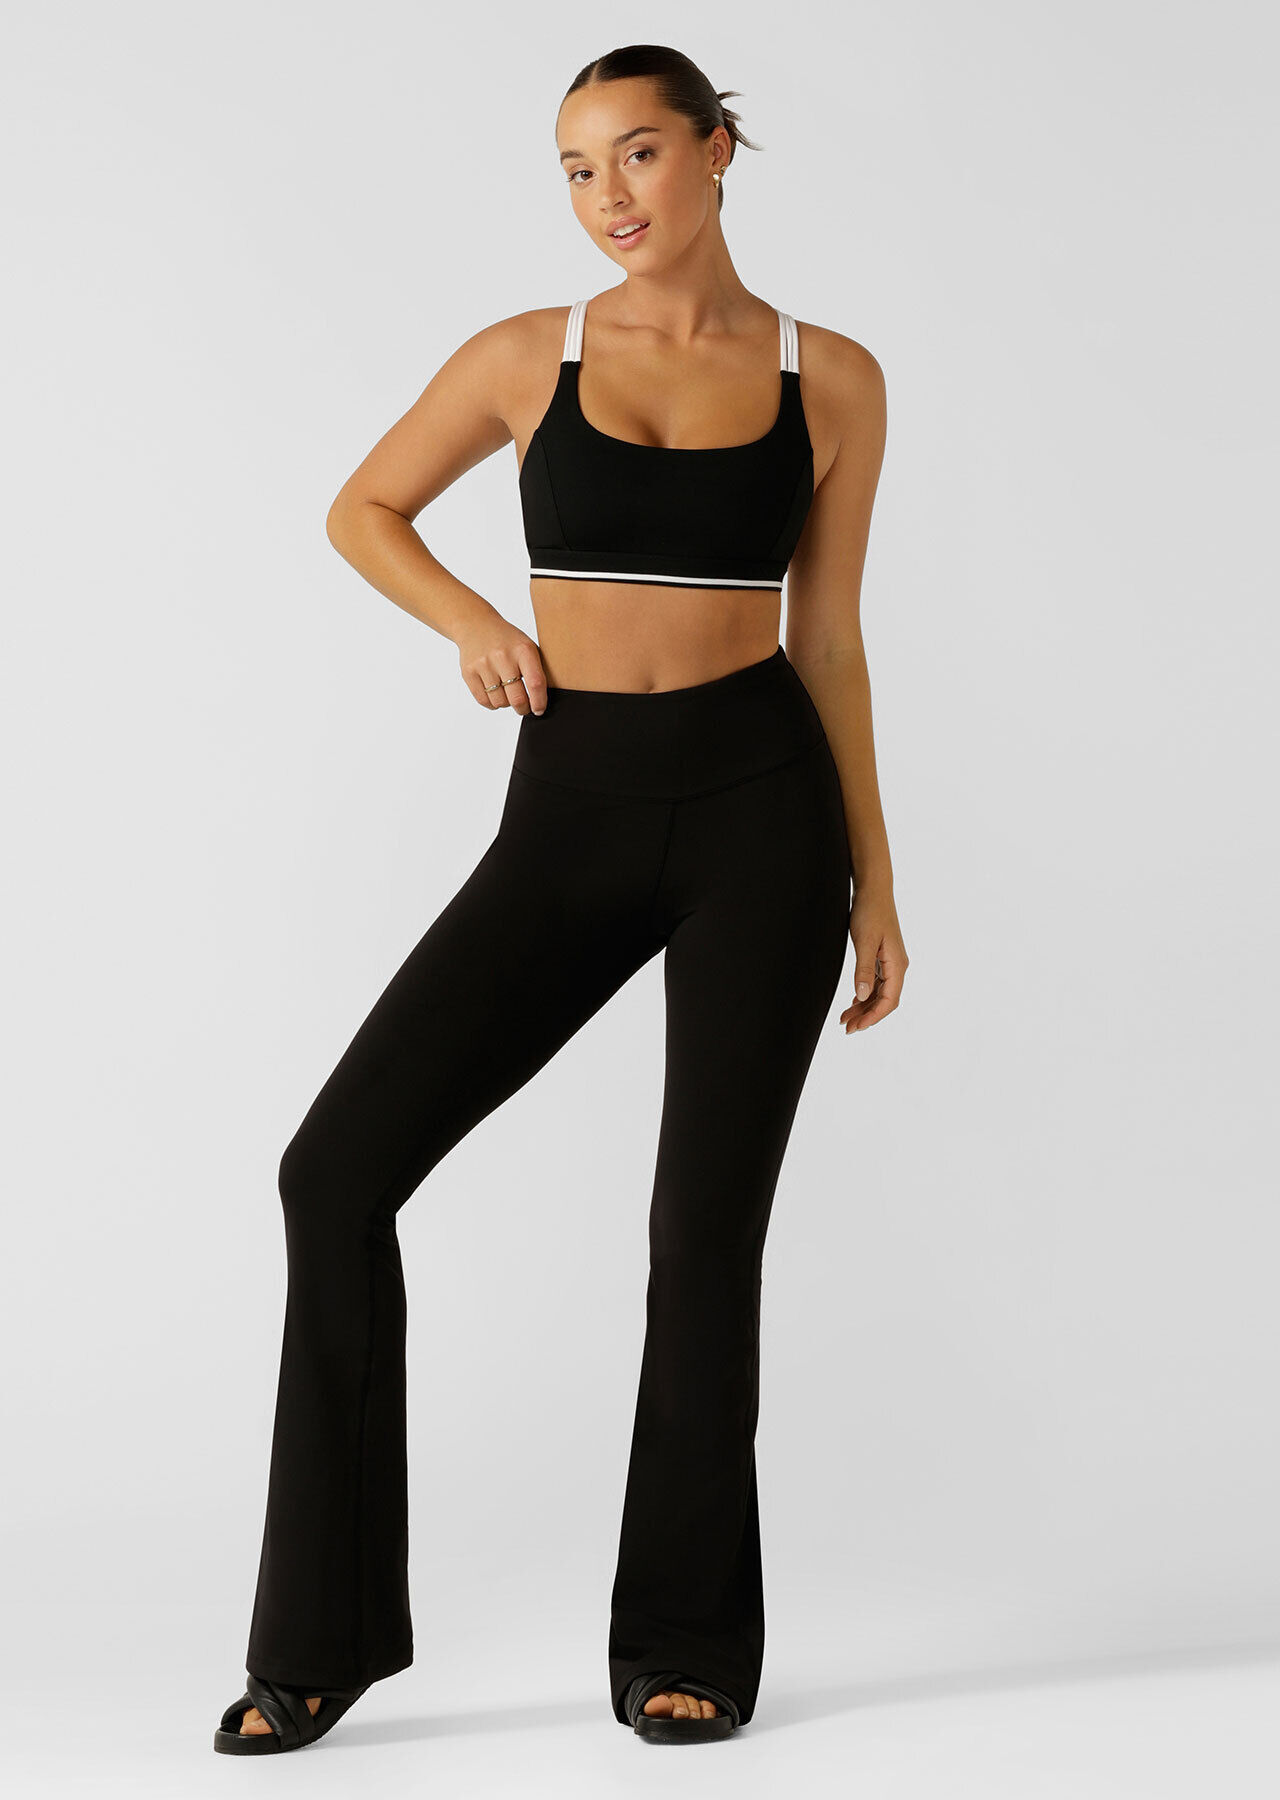 Buy Women Stretchable Flared Pants With Pockets online